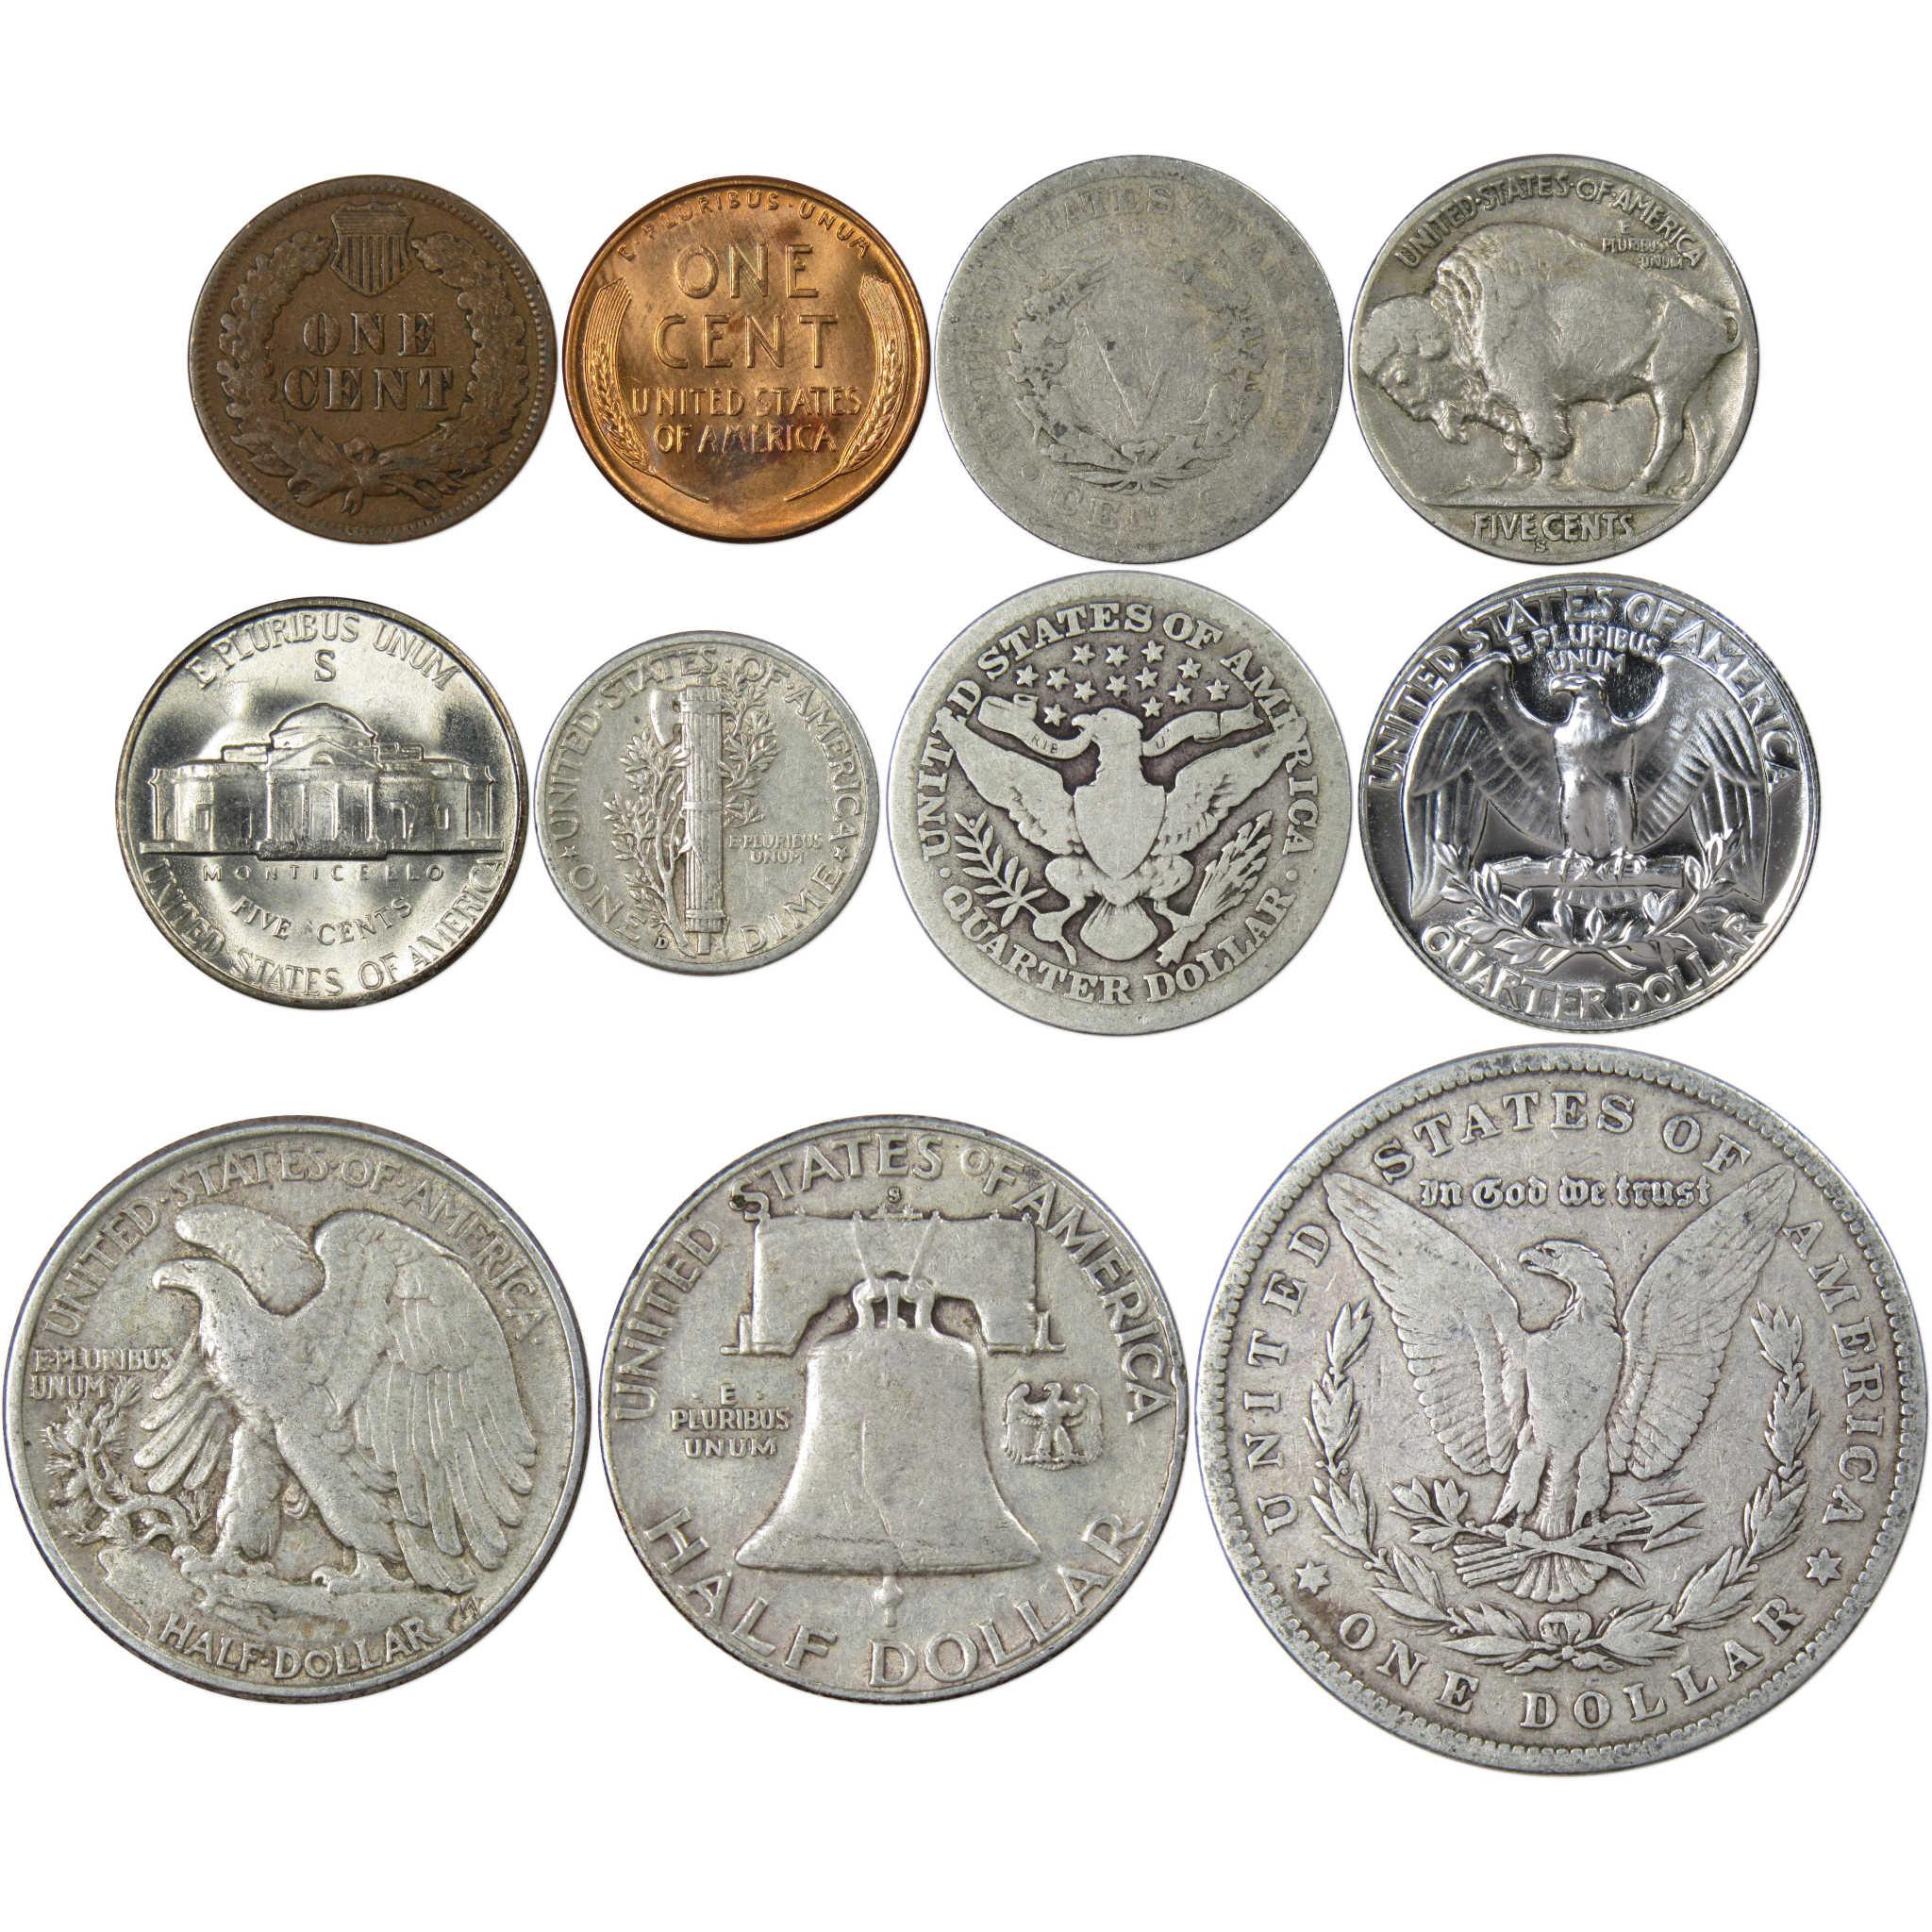 Collector's Set of 11 U.S. Coins Good or Better